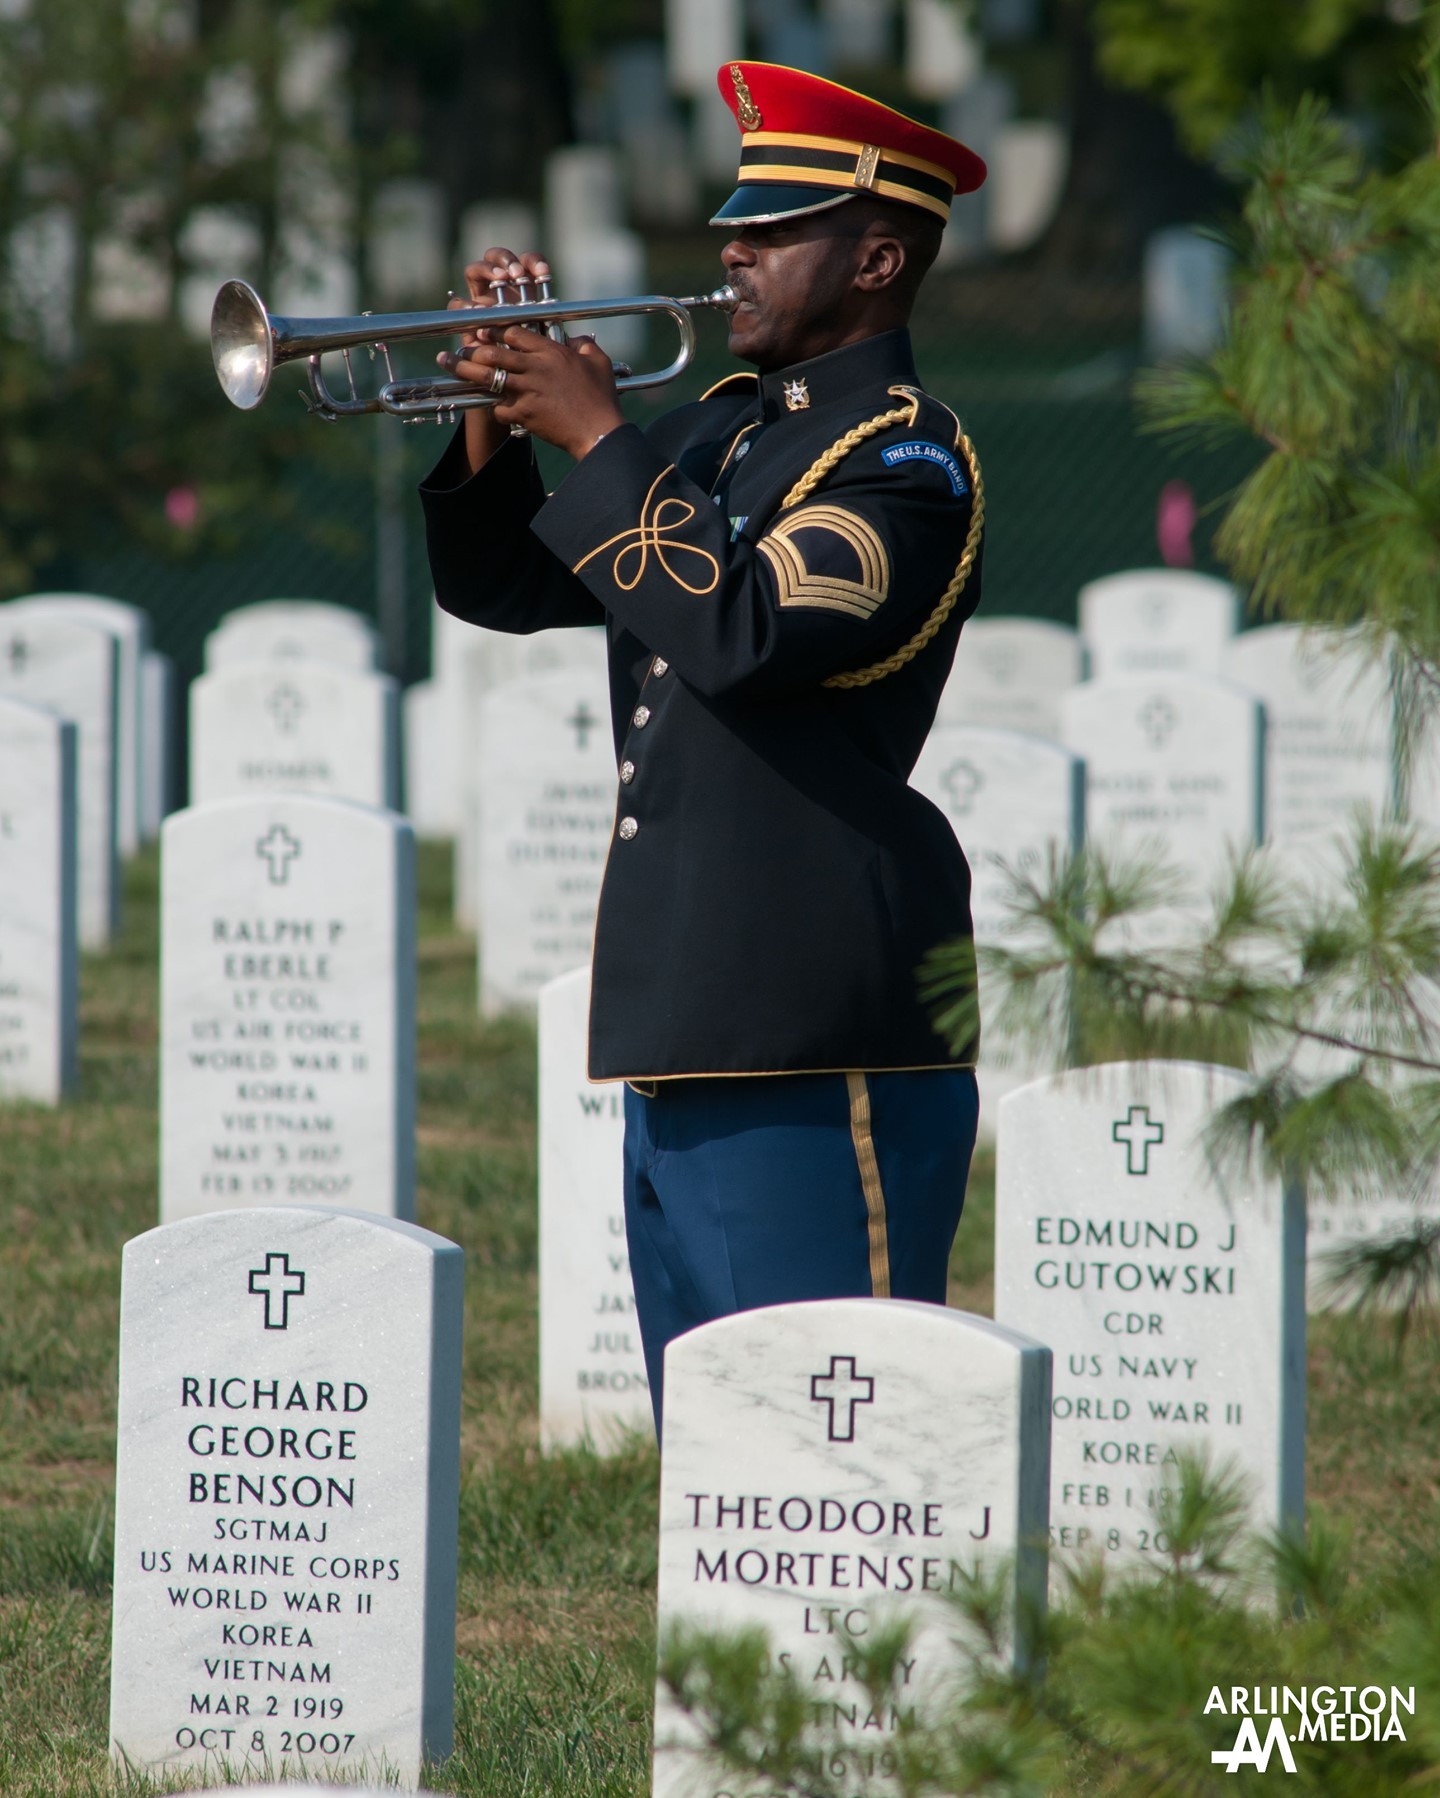 A US Army Band bugler plays Taps during military honors in Section 54 of Arlington National Cemetery.  This image was captured on a service covered by our @arlingtonmedia team.